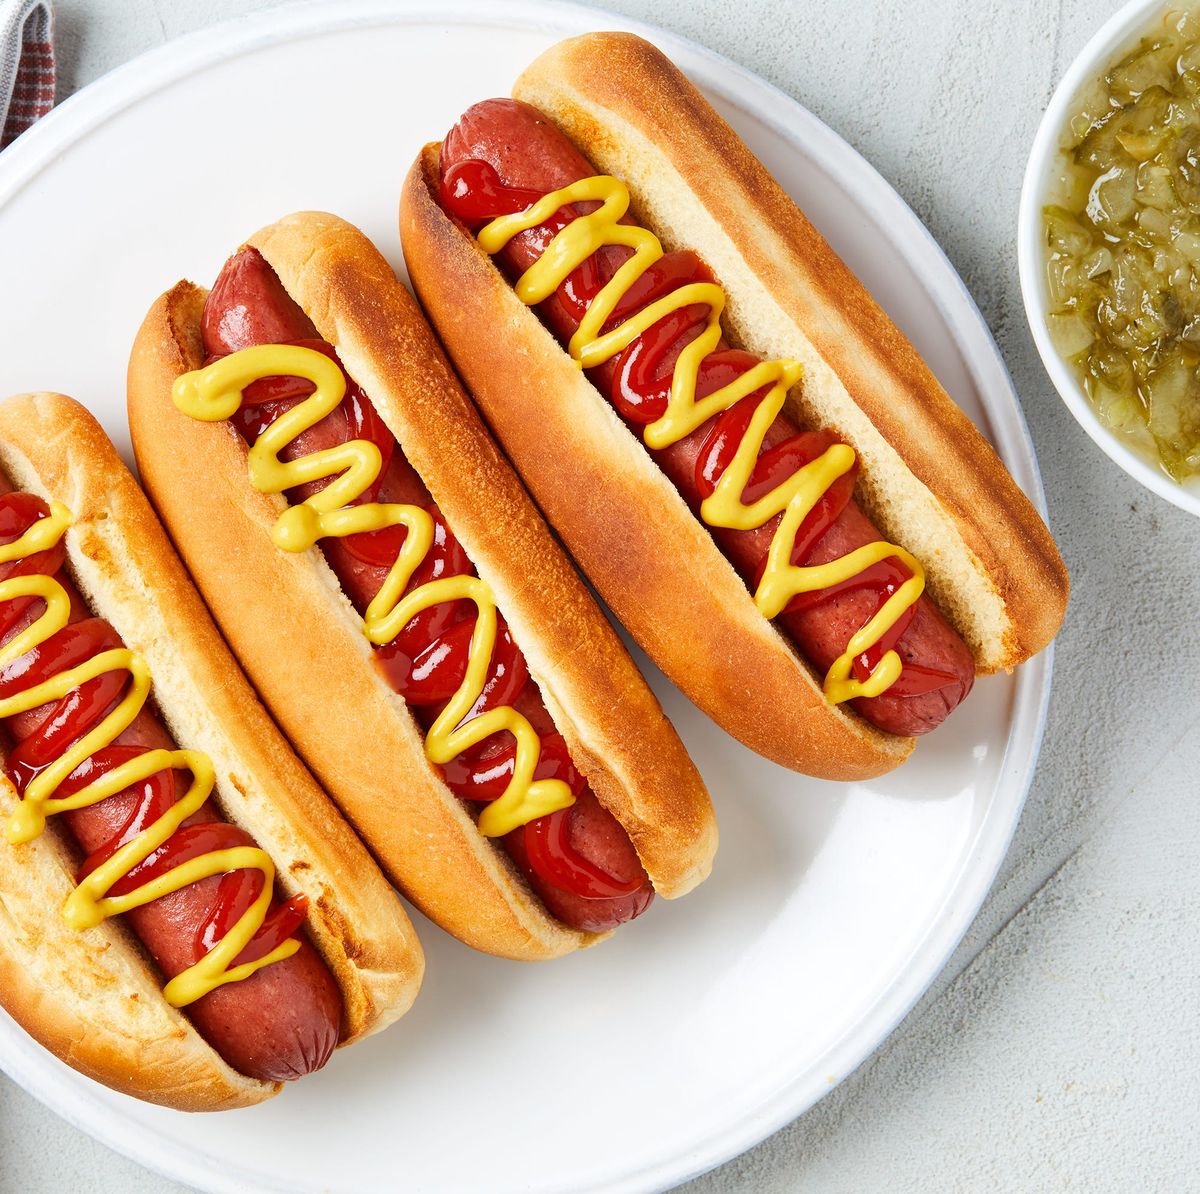 Best Air Fryer Hot Dogs Recipe - How To Make Air Fryer Hot Dogs